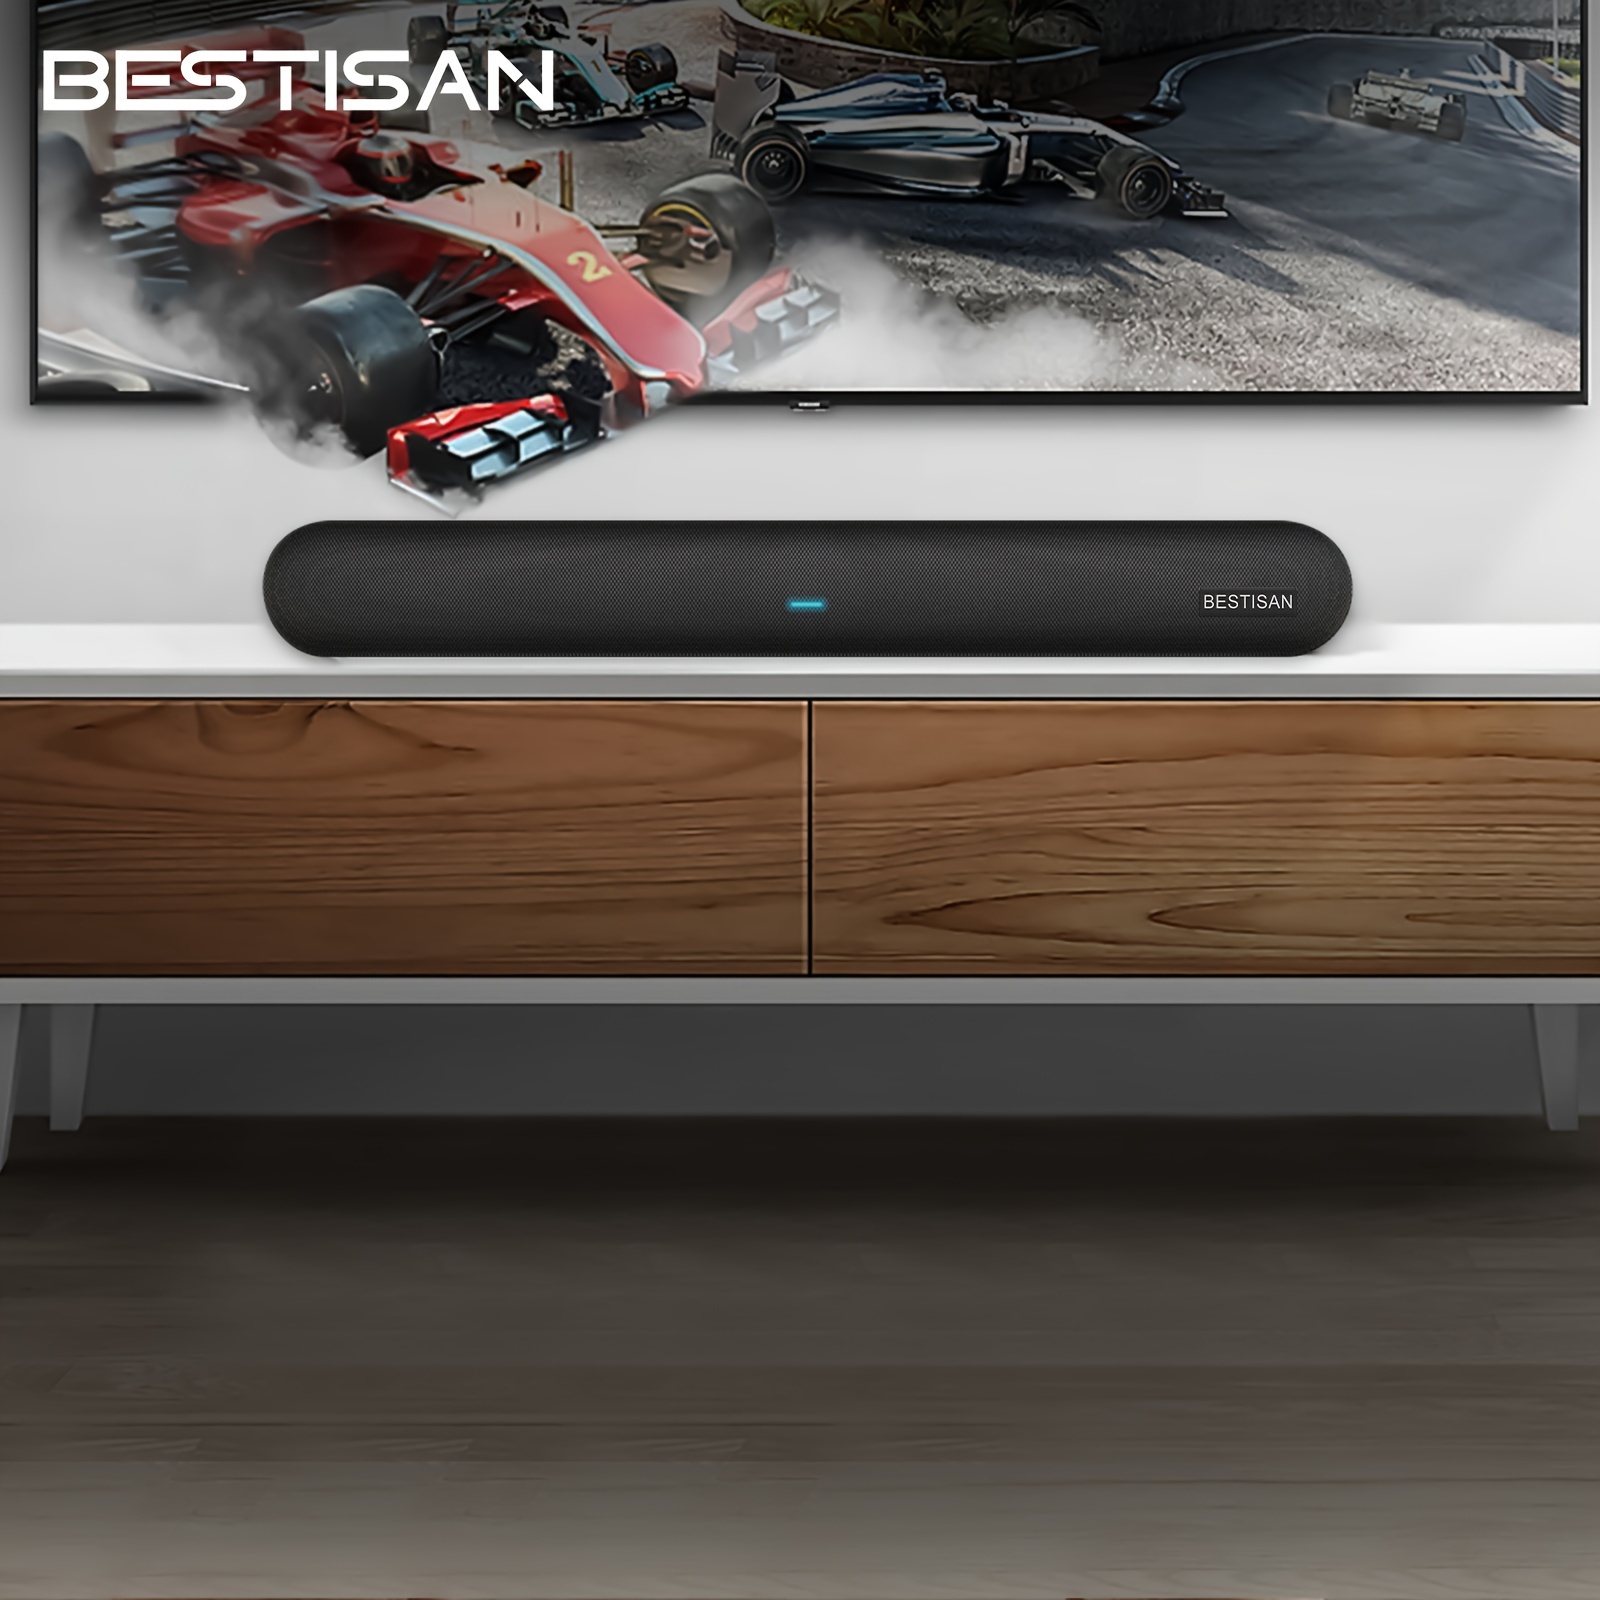 

Bestisan St08 Soundbar 28-inch 80w With Arc, Bt 5.0, Optical, Usb, Aux Connection, 4 Speakers, 3 Eqs, 110db Surround Sound Bar Home Theater